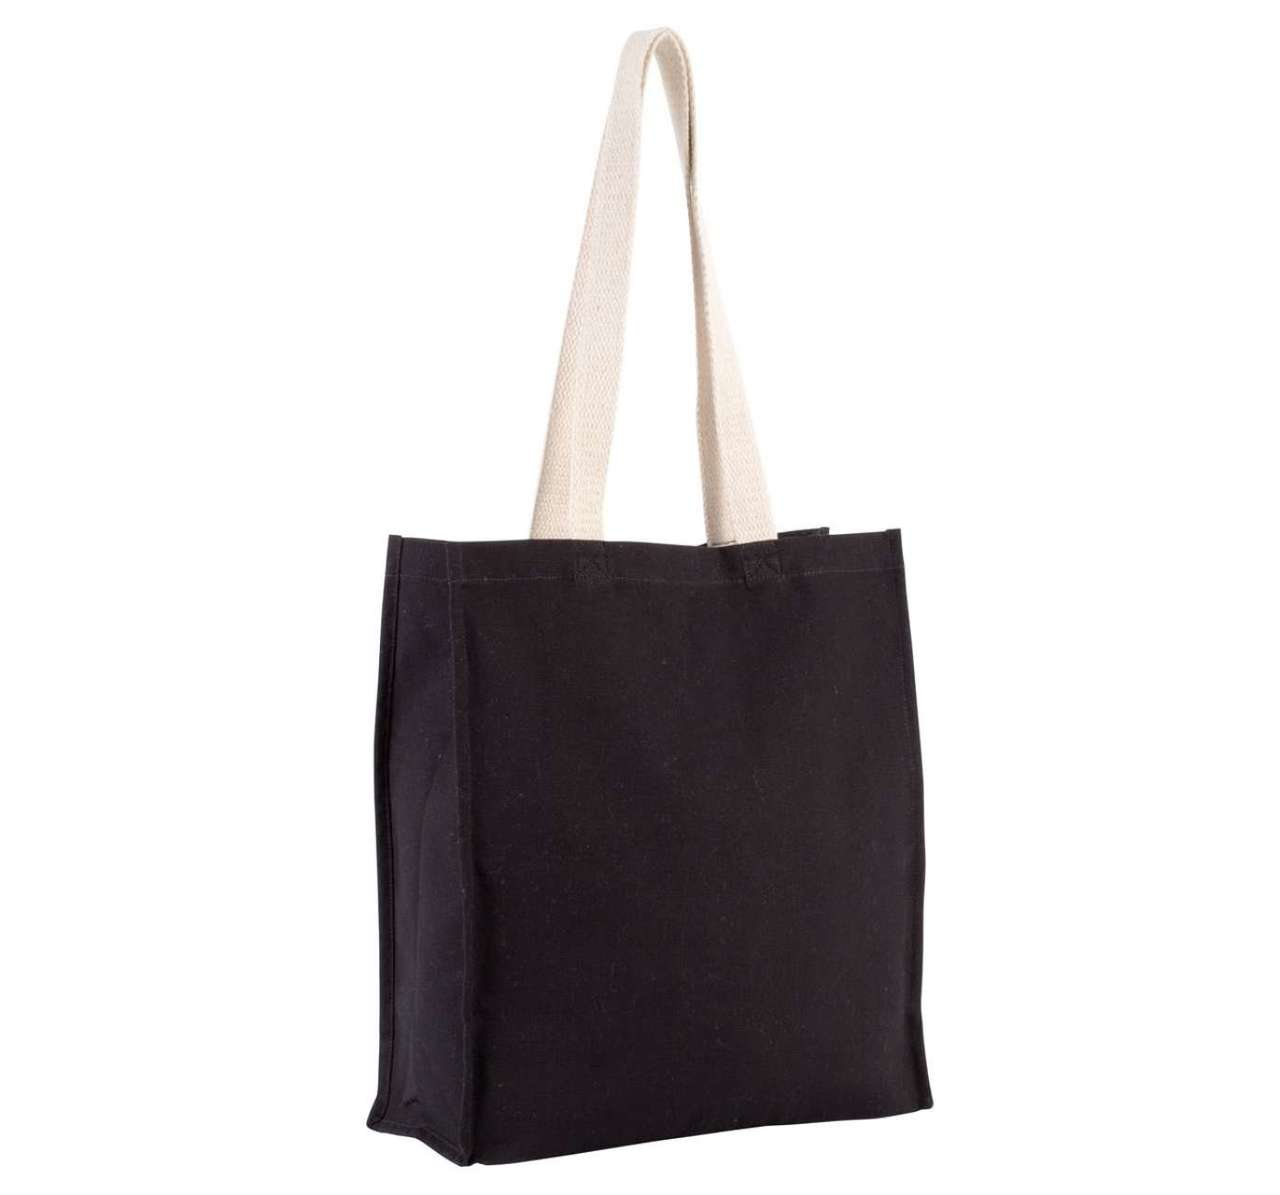 TOTE BAG WITH GUSSET - MERCHYOU